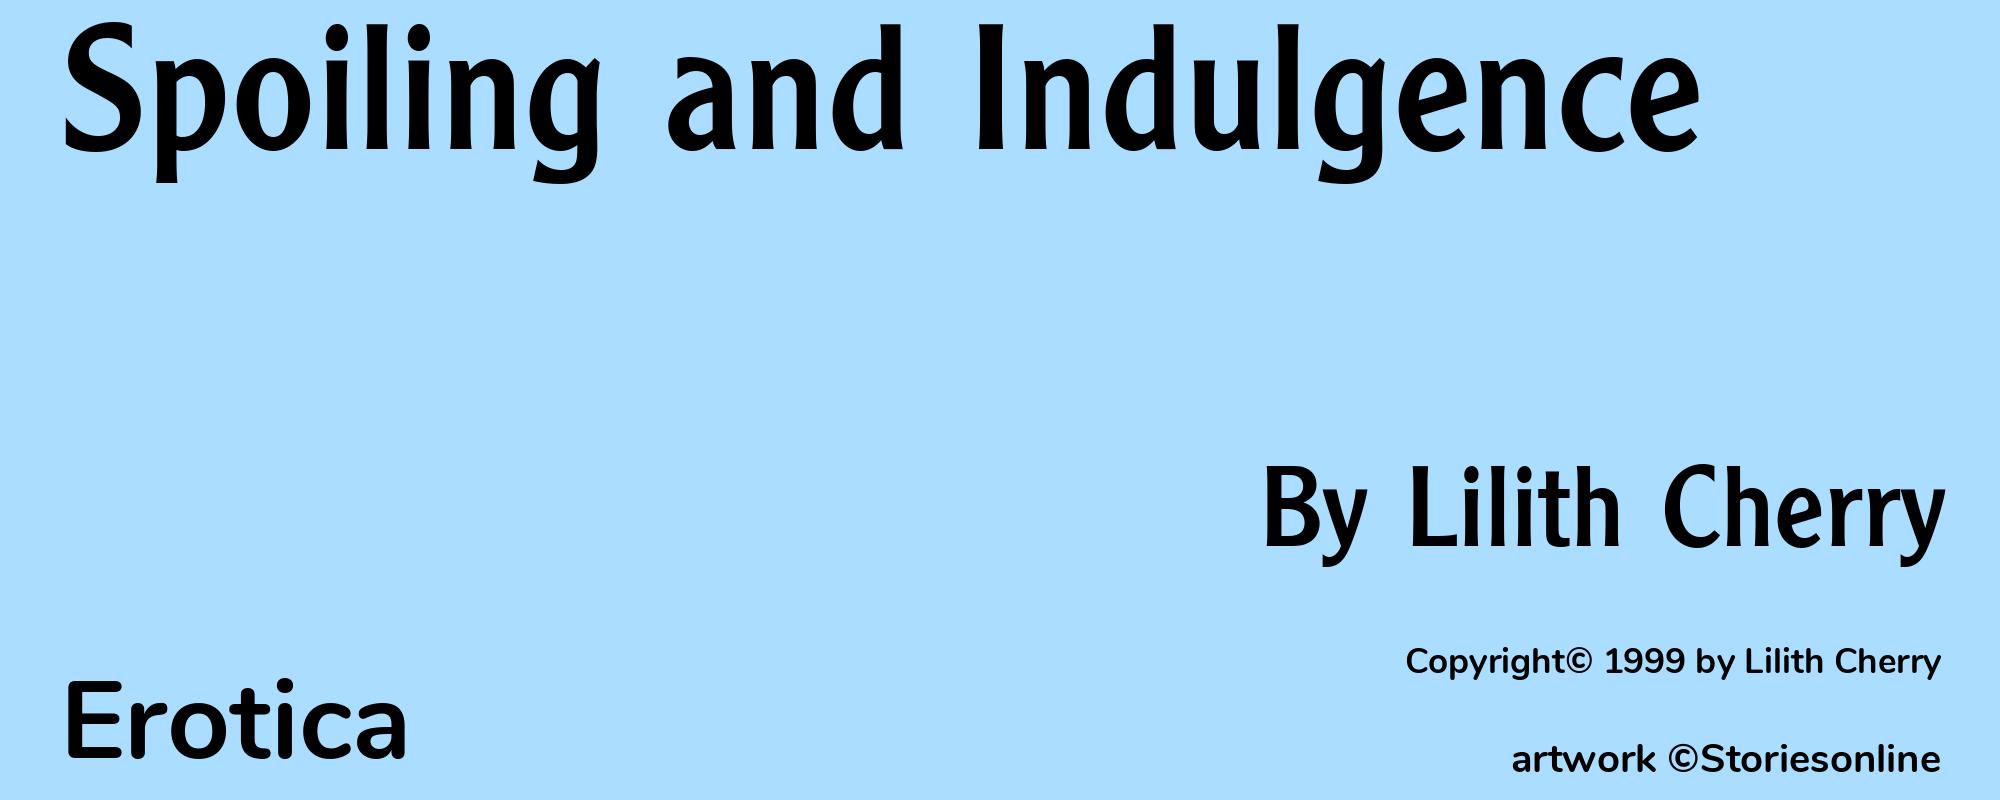 Spoiling and Indulgence - Cover